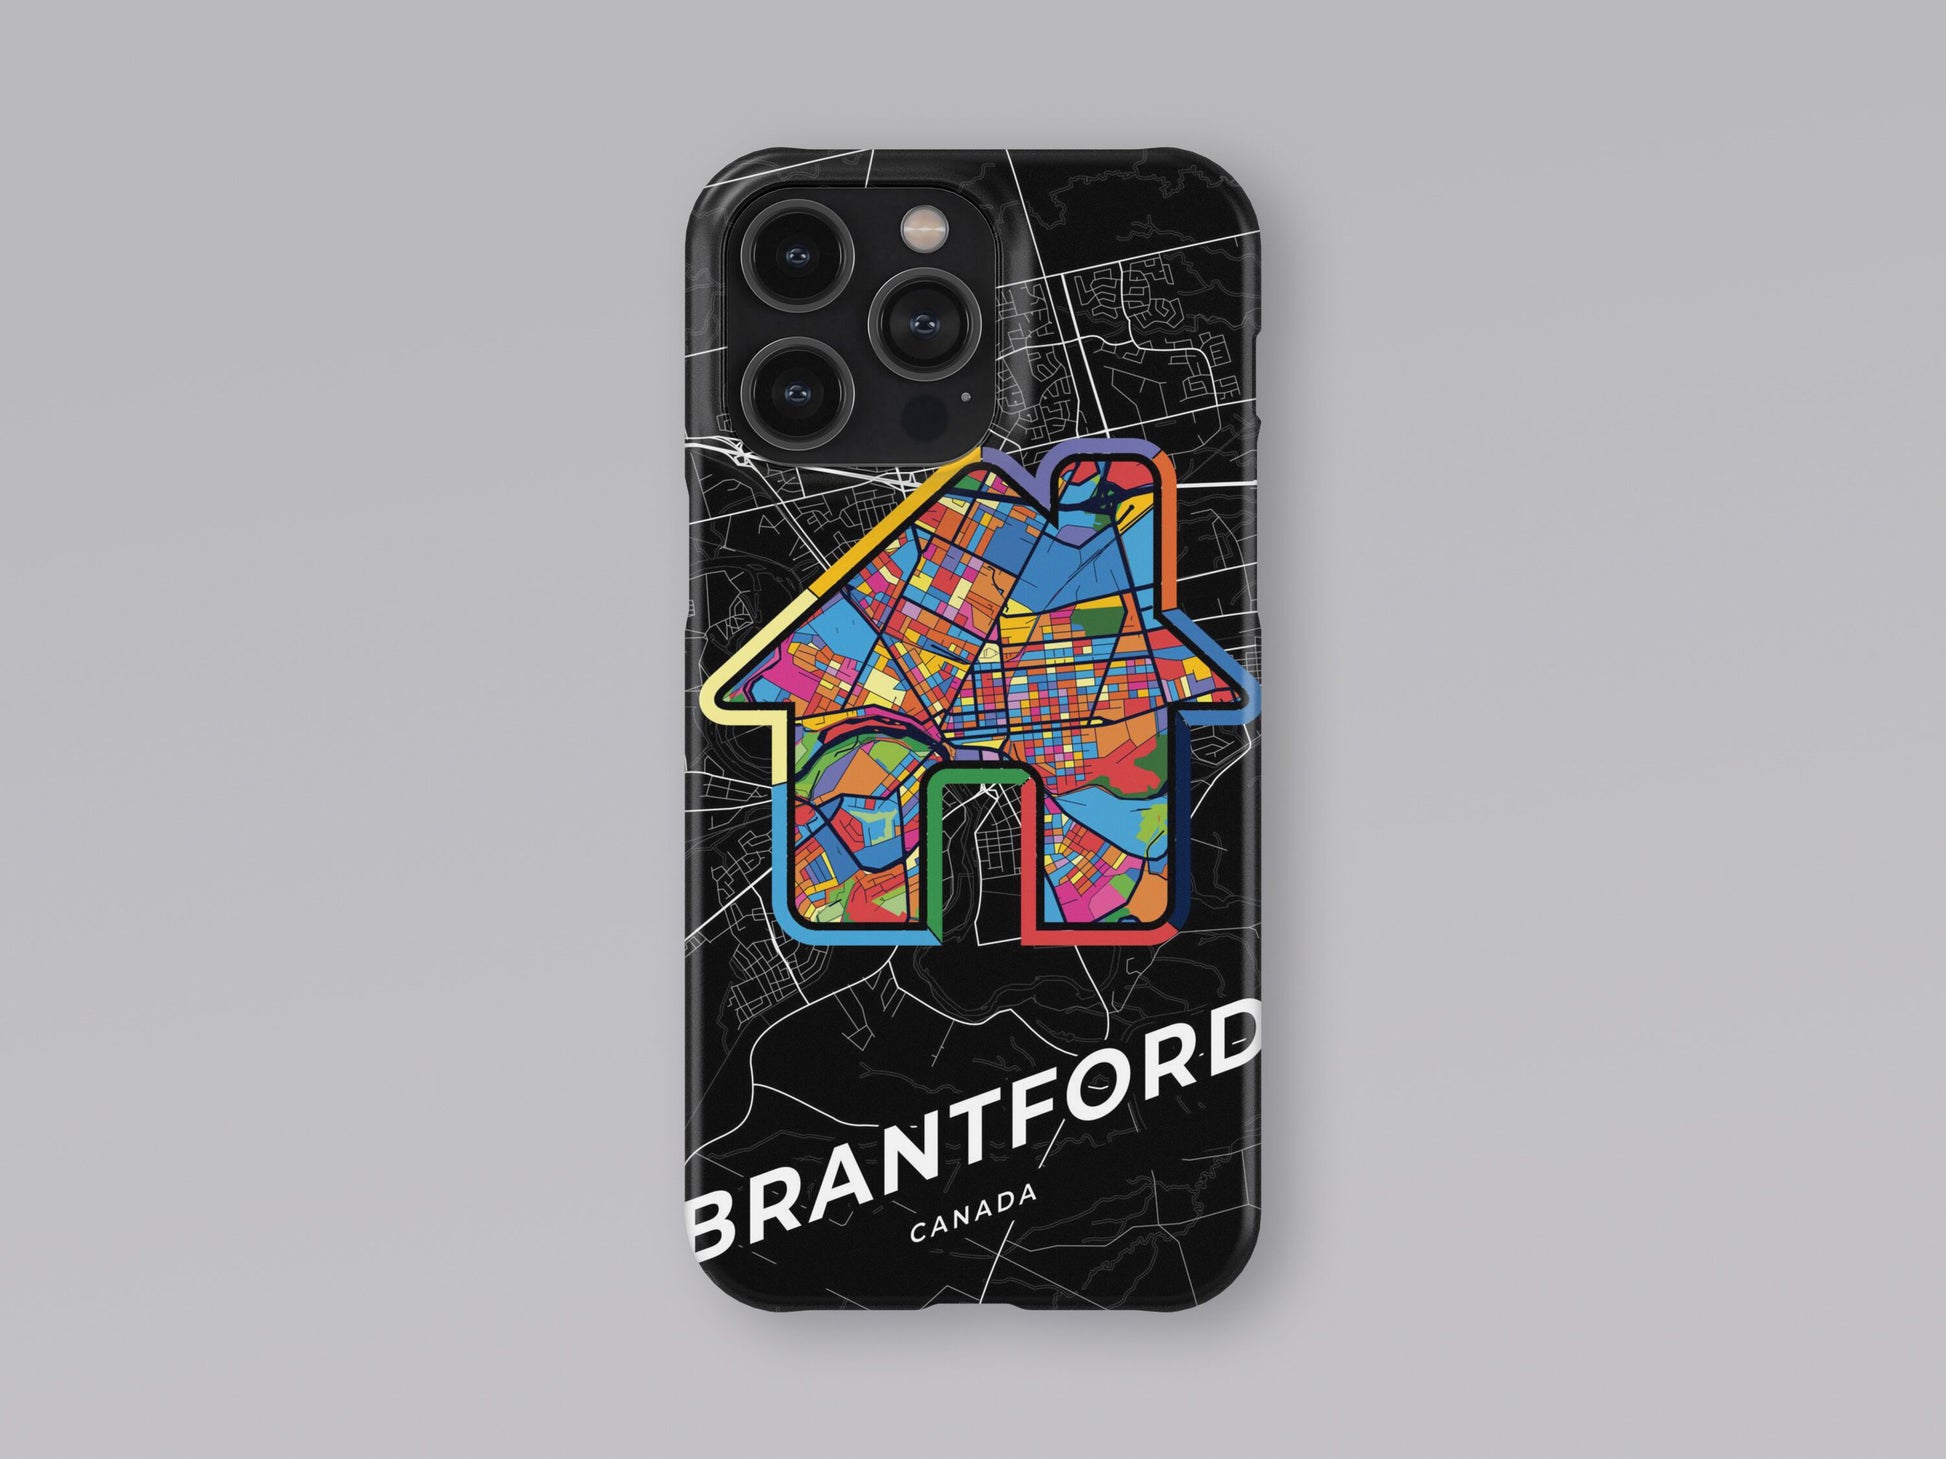 Brantford Canada slim phone case with colorful icon. Birthday, wedding or housewarming gift. Couple match cases. 3